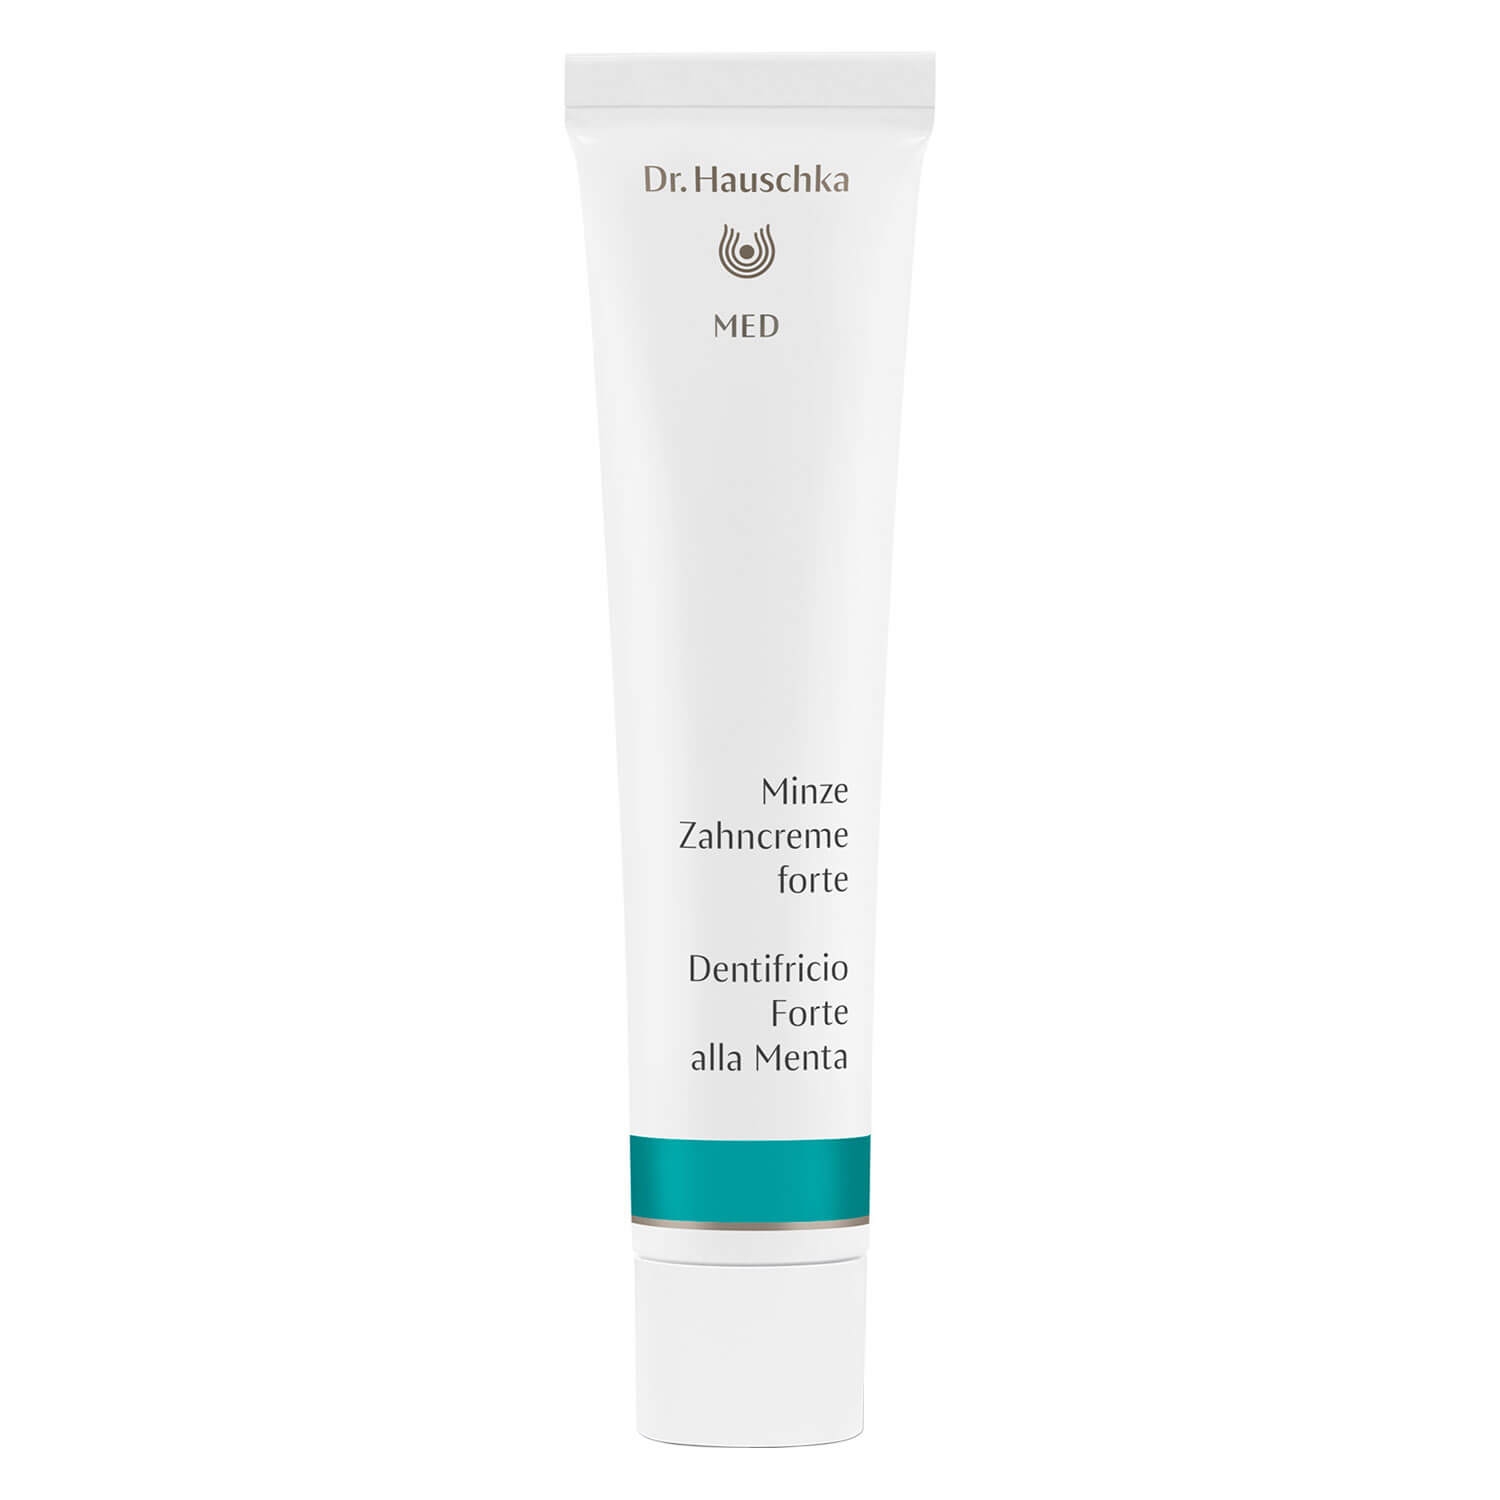 Product image from Dr. Hauschka MED - Forte Zahncreme Minze